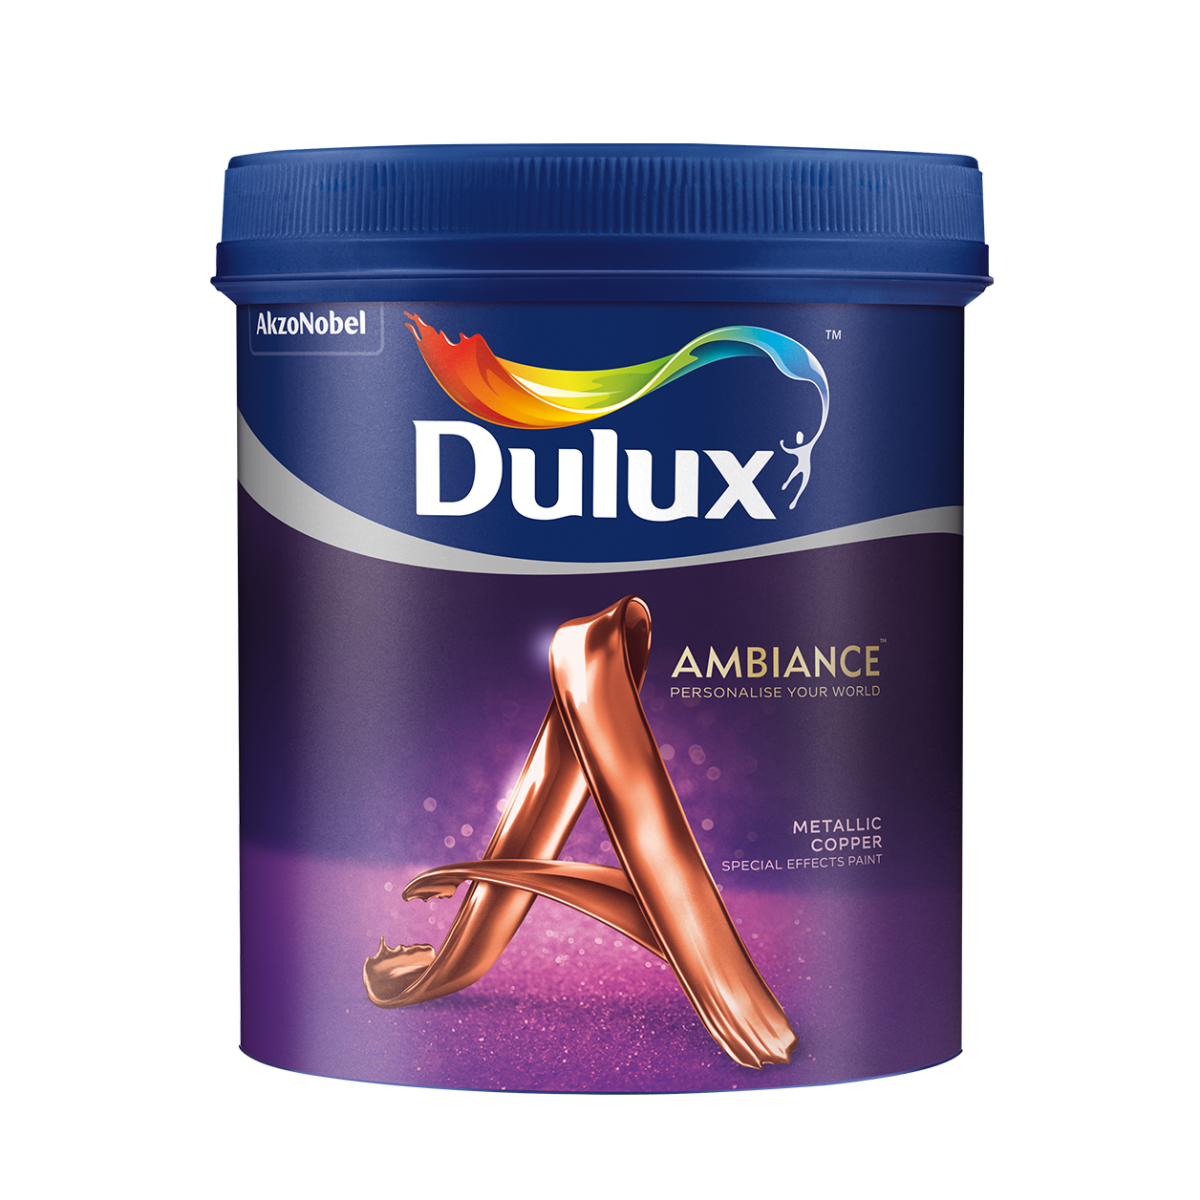 Dulux Ambiance Special Effects Paints (Metallic Copper)